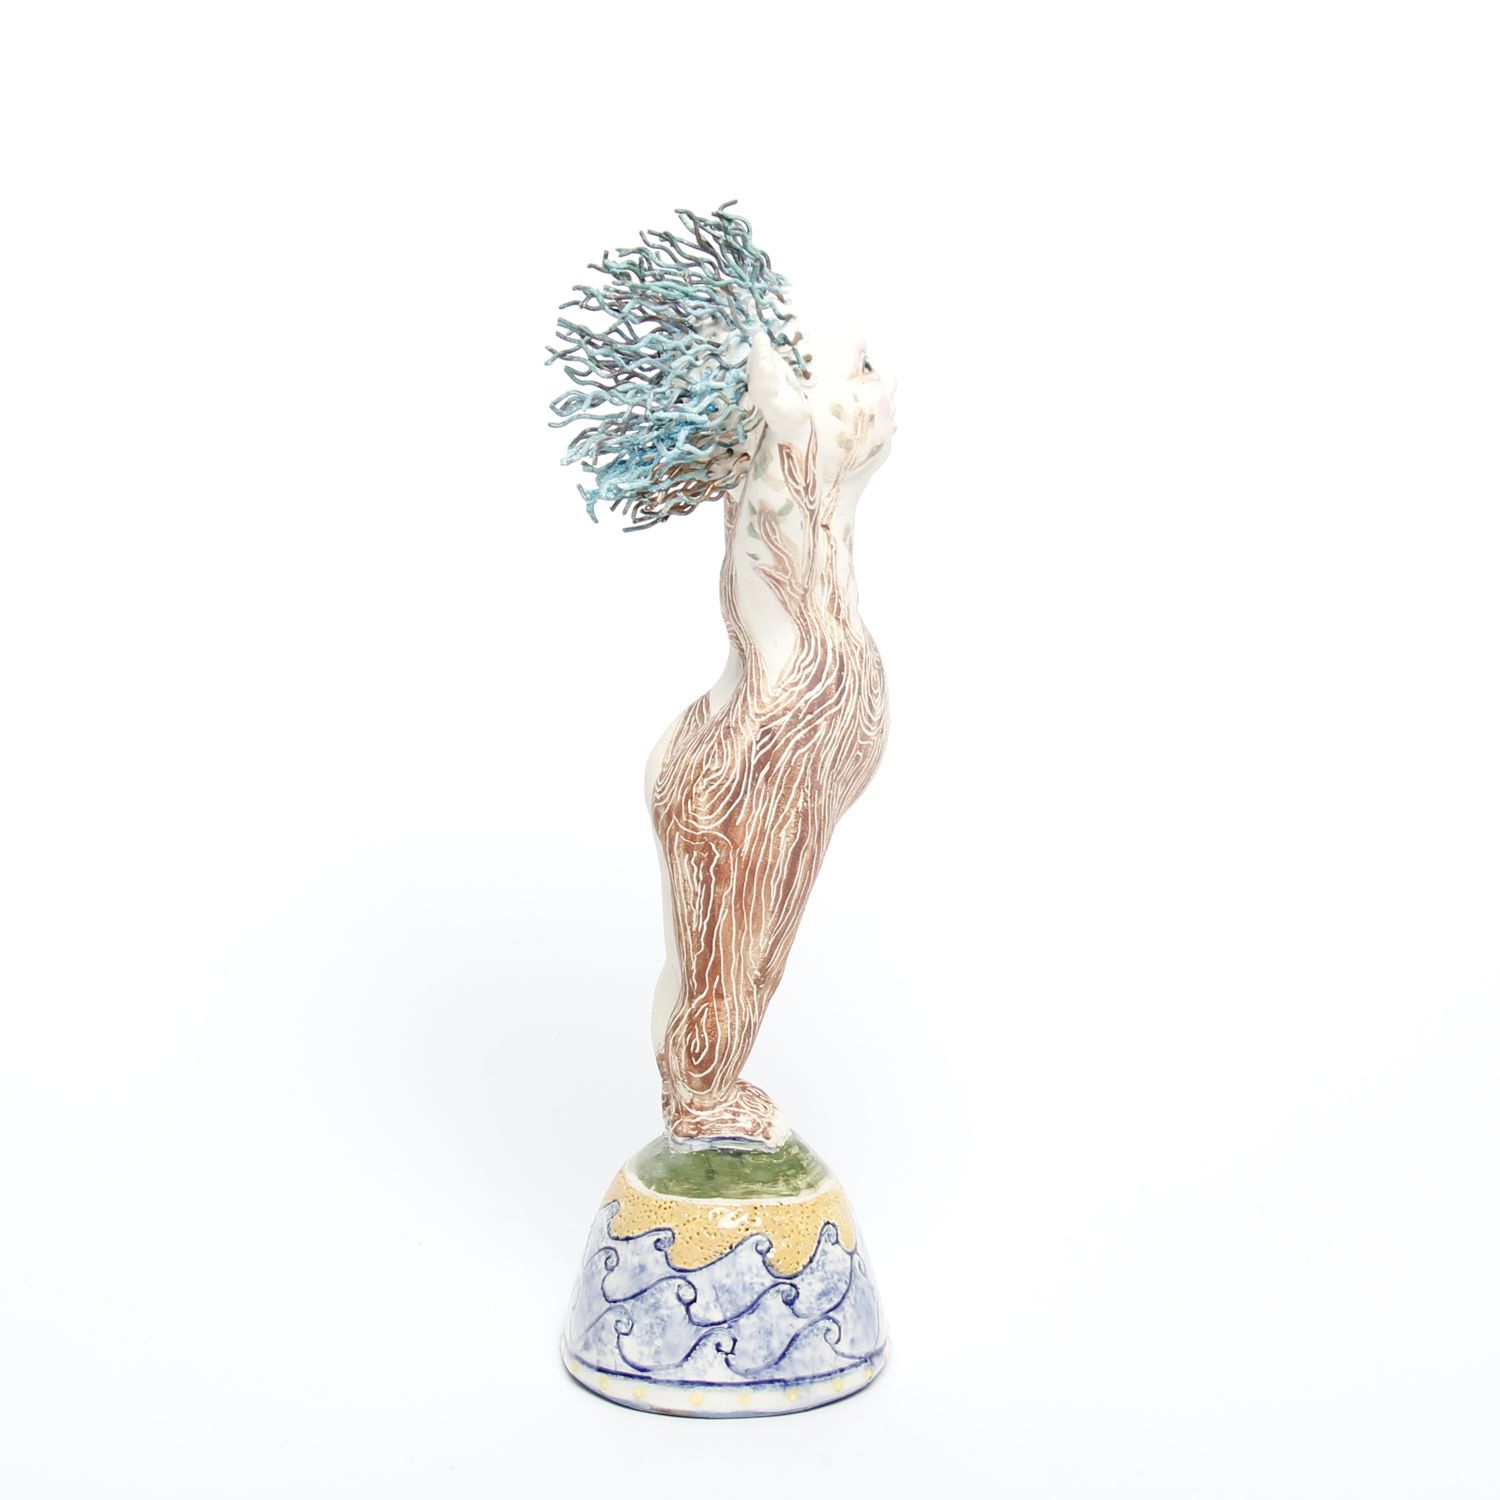 Debra Sloan: Branching Out Product Image 3 of 3